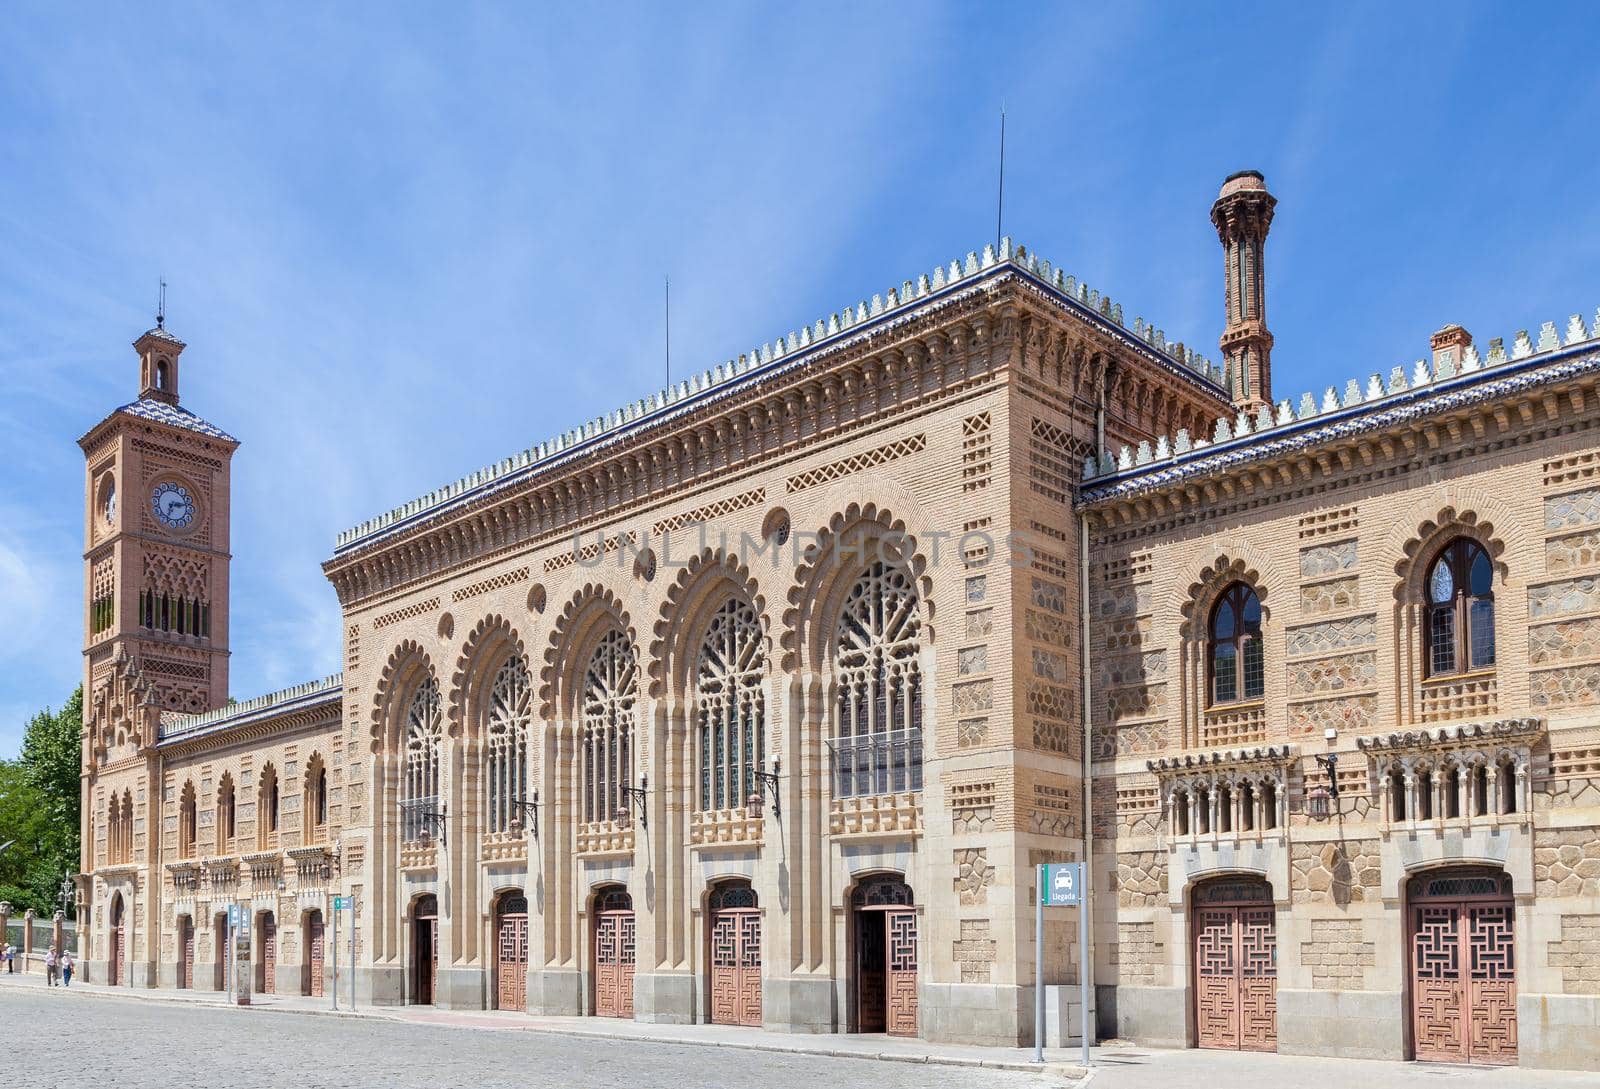 View of the railway station in Toledo by Goodday